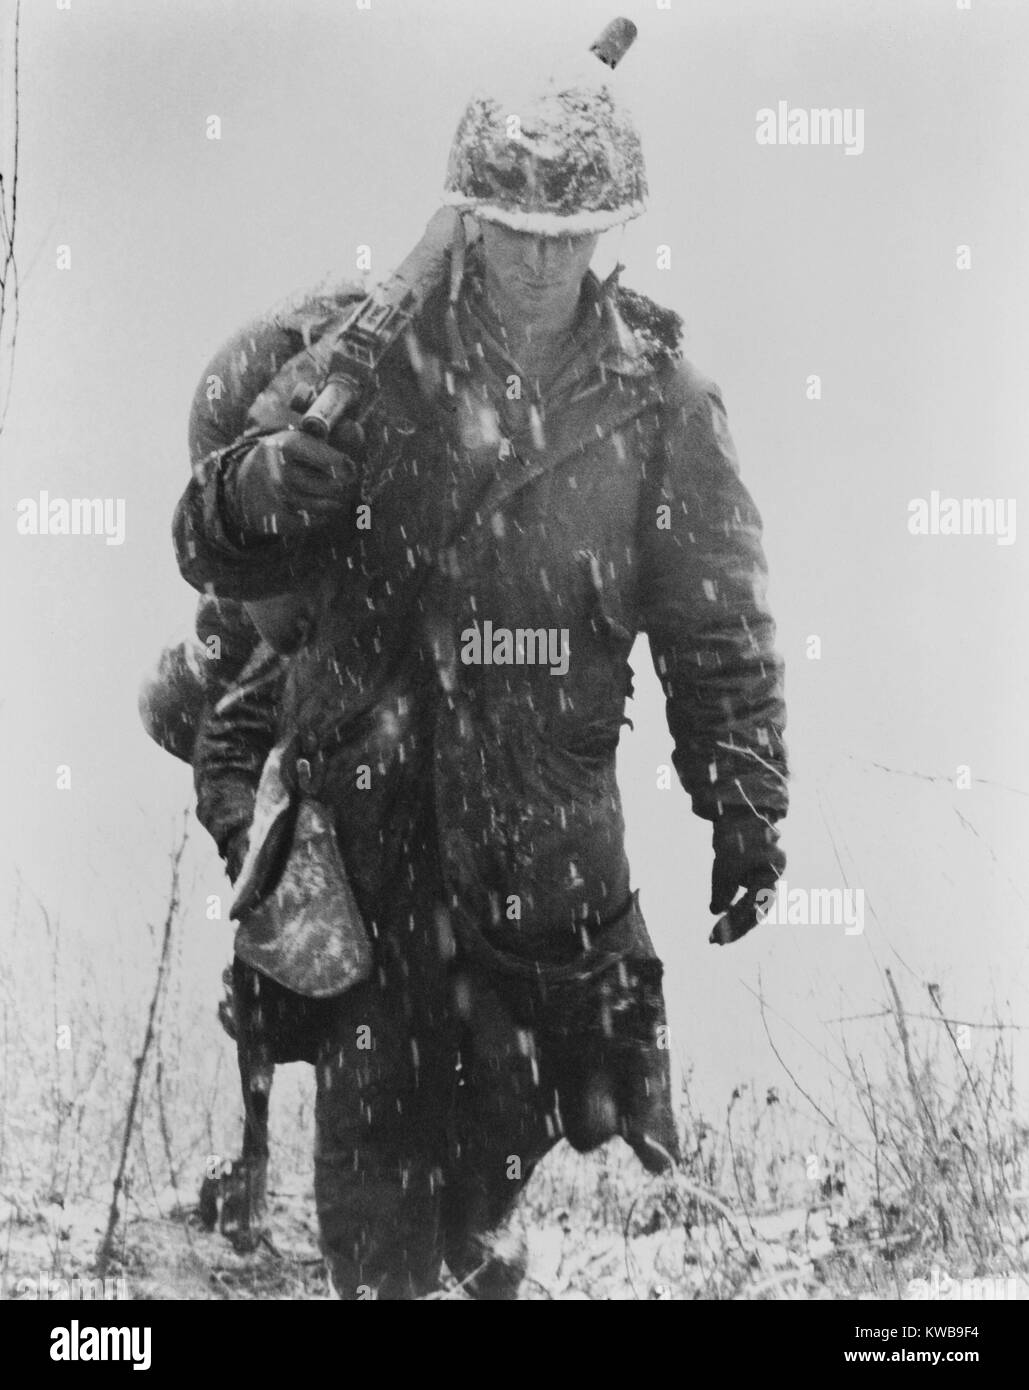 U.S. Marine among those supporting the embattled First Marine Division and Seventh Infantry Division at Yudam-Ni, Nov. 27-Dec. 3, 1950. Korean War, 1950-53. (BSLOC 2014 11 79) Stock Photo